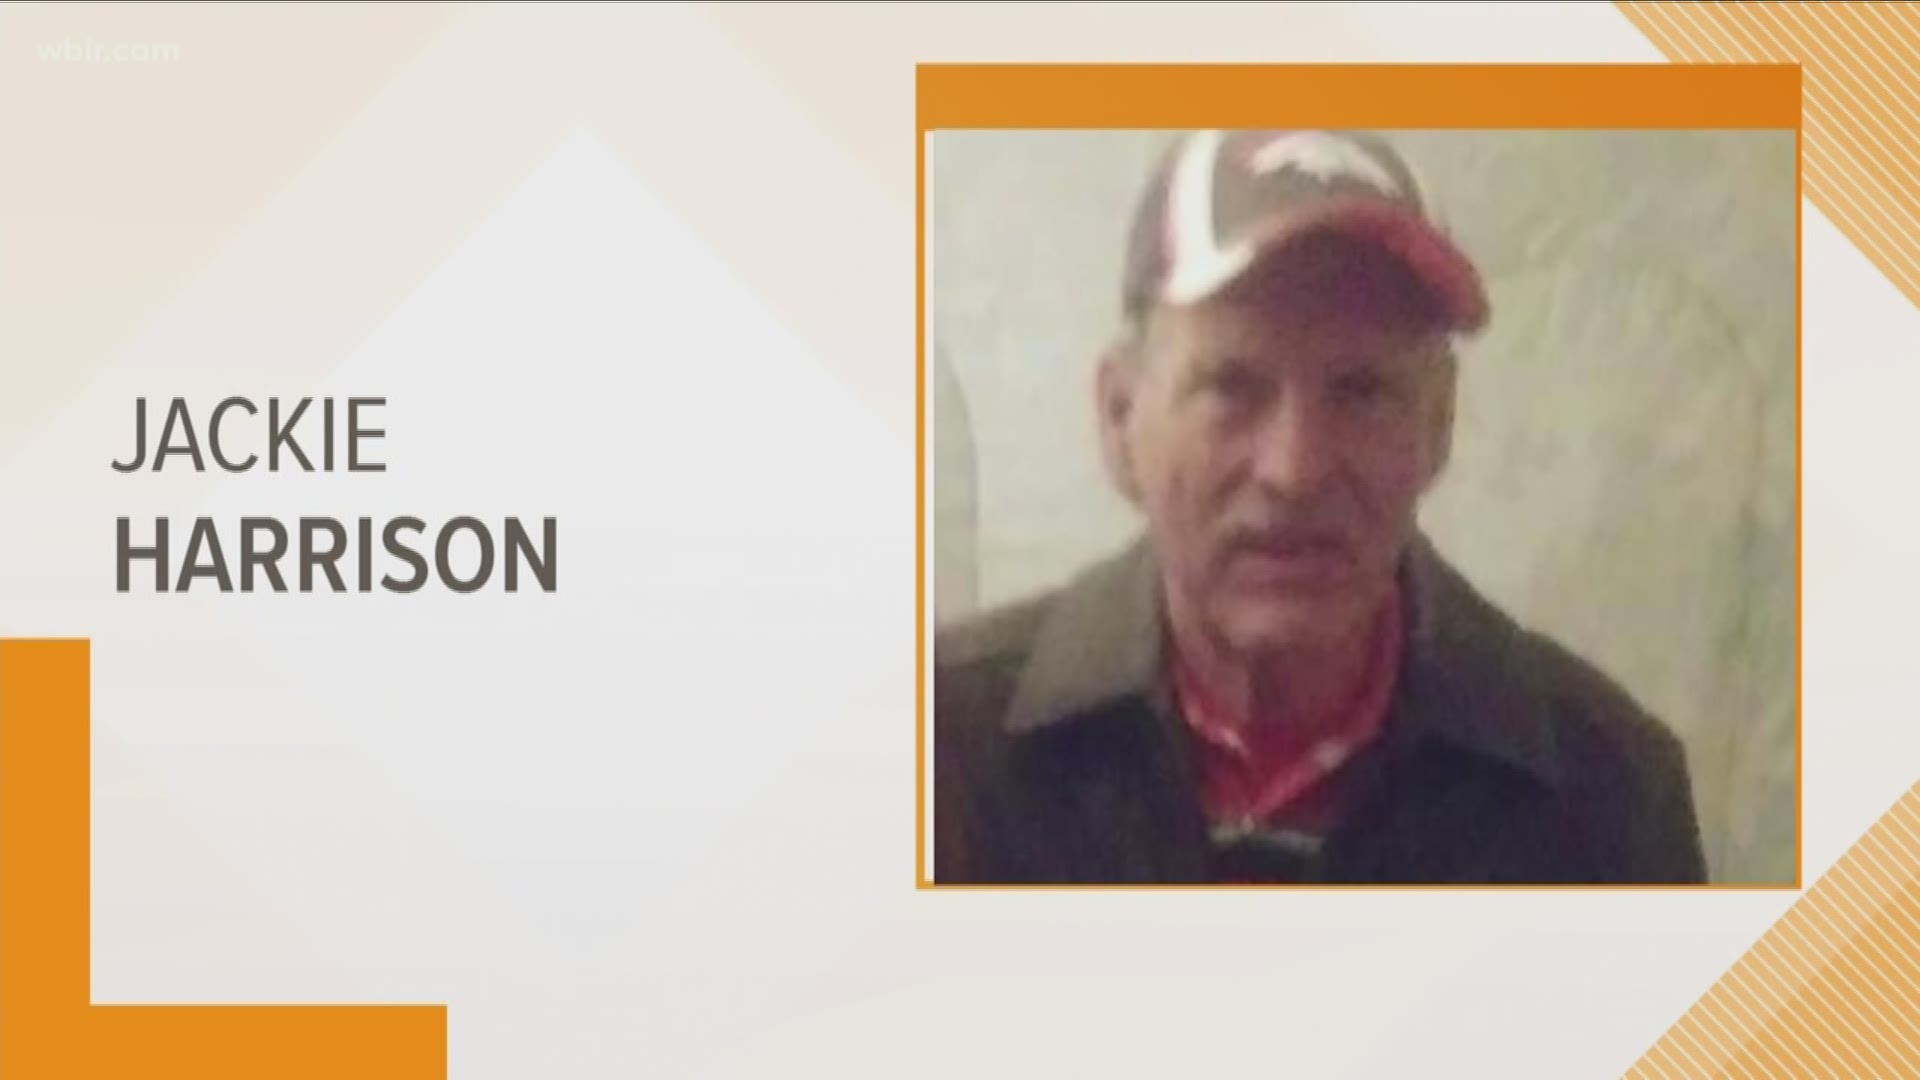 KCSO is asking people to keep an eye out for Jackie Harrison after he was separated from his family